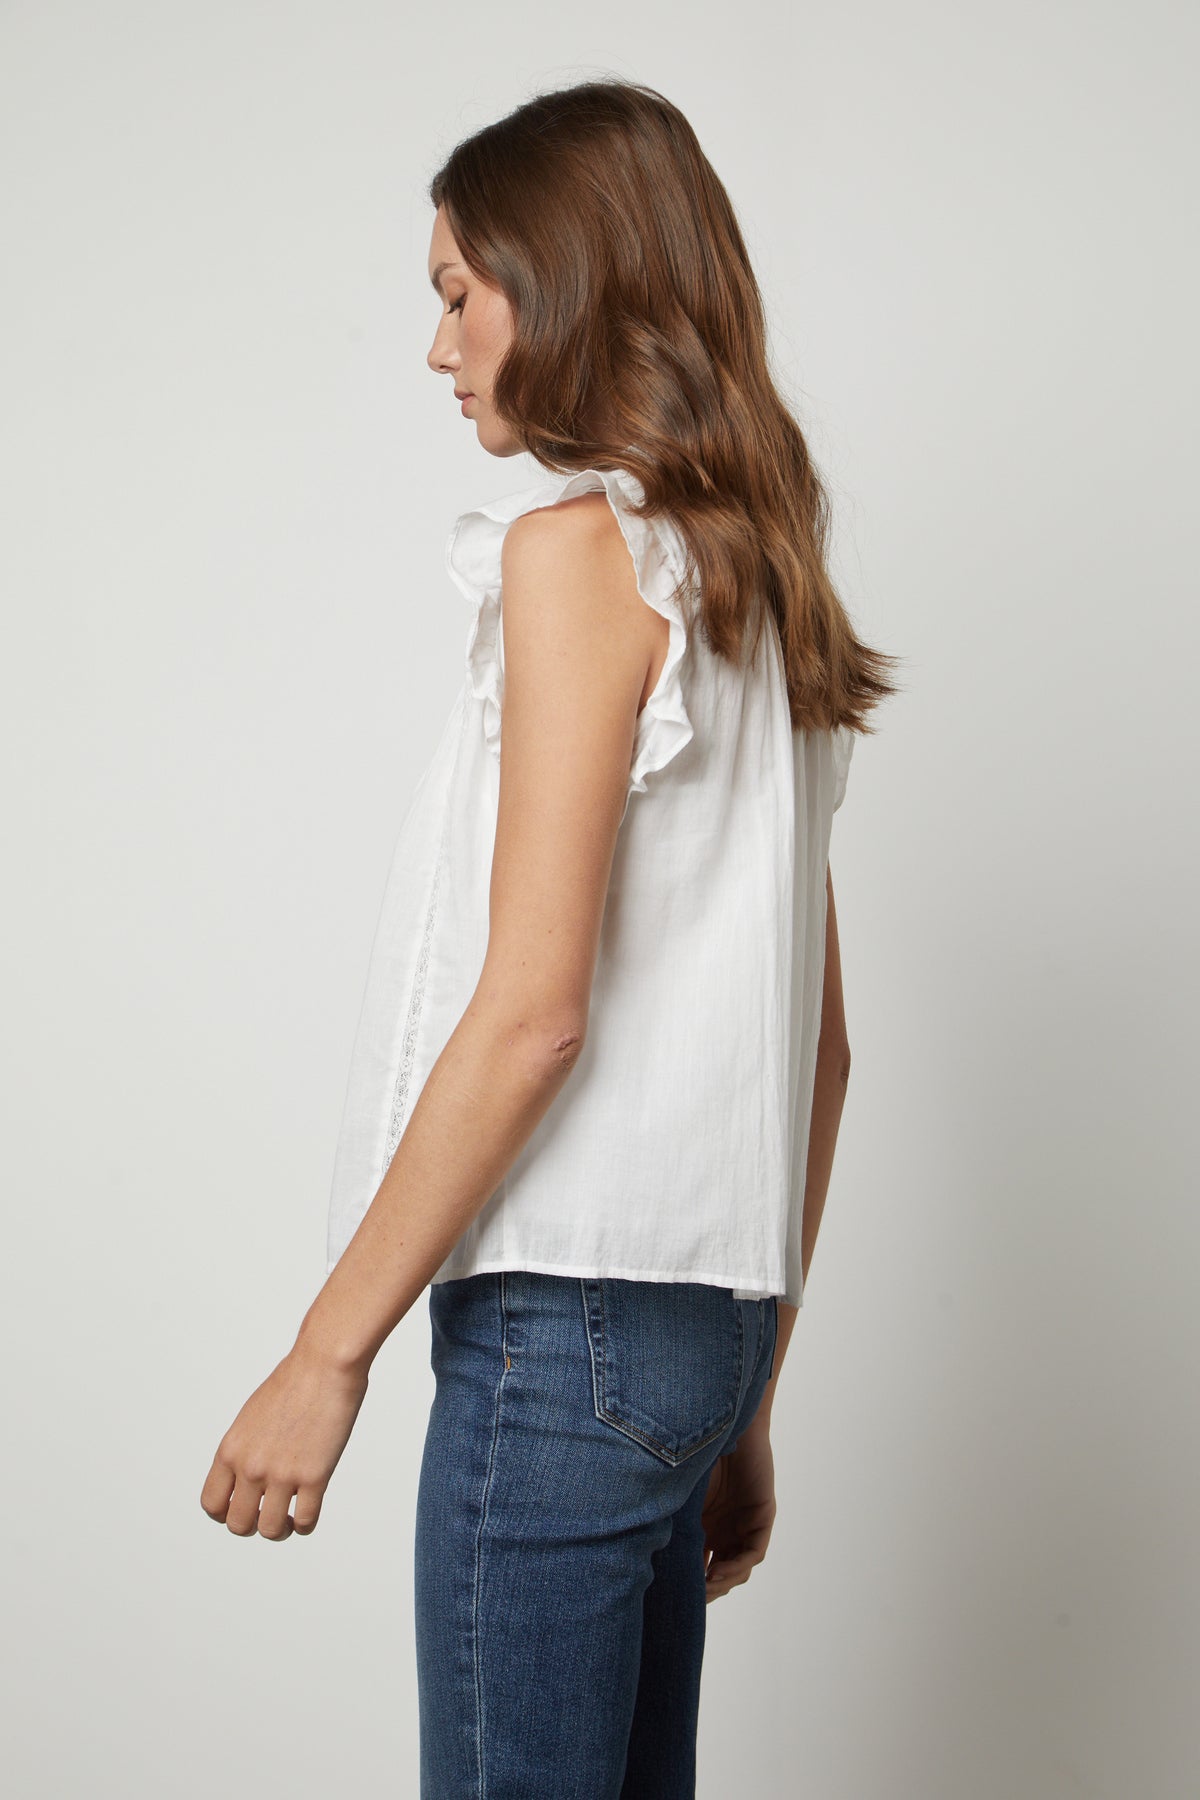 The back view of a woman wearing jeans and the LIANA LACE TANK TOP by Velvet by Graham & Spencer.-35656122630337